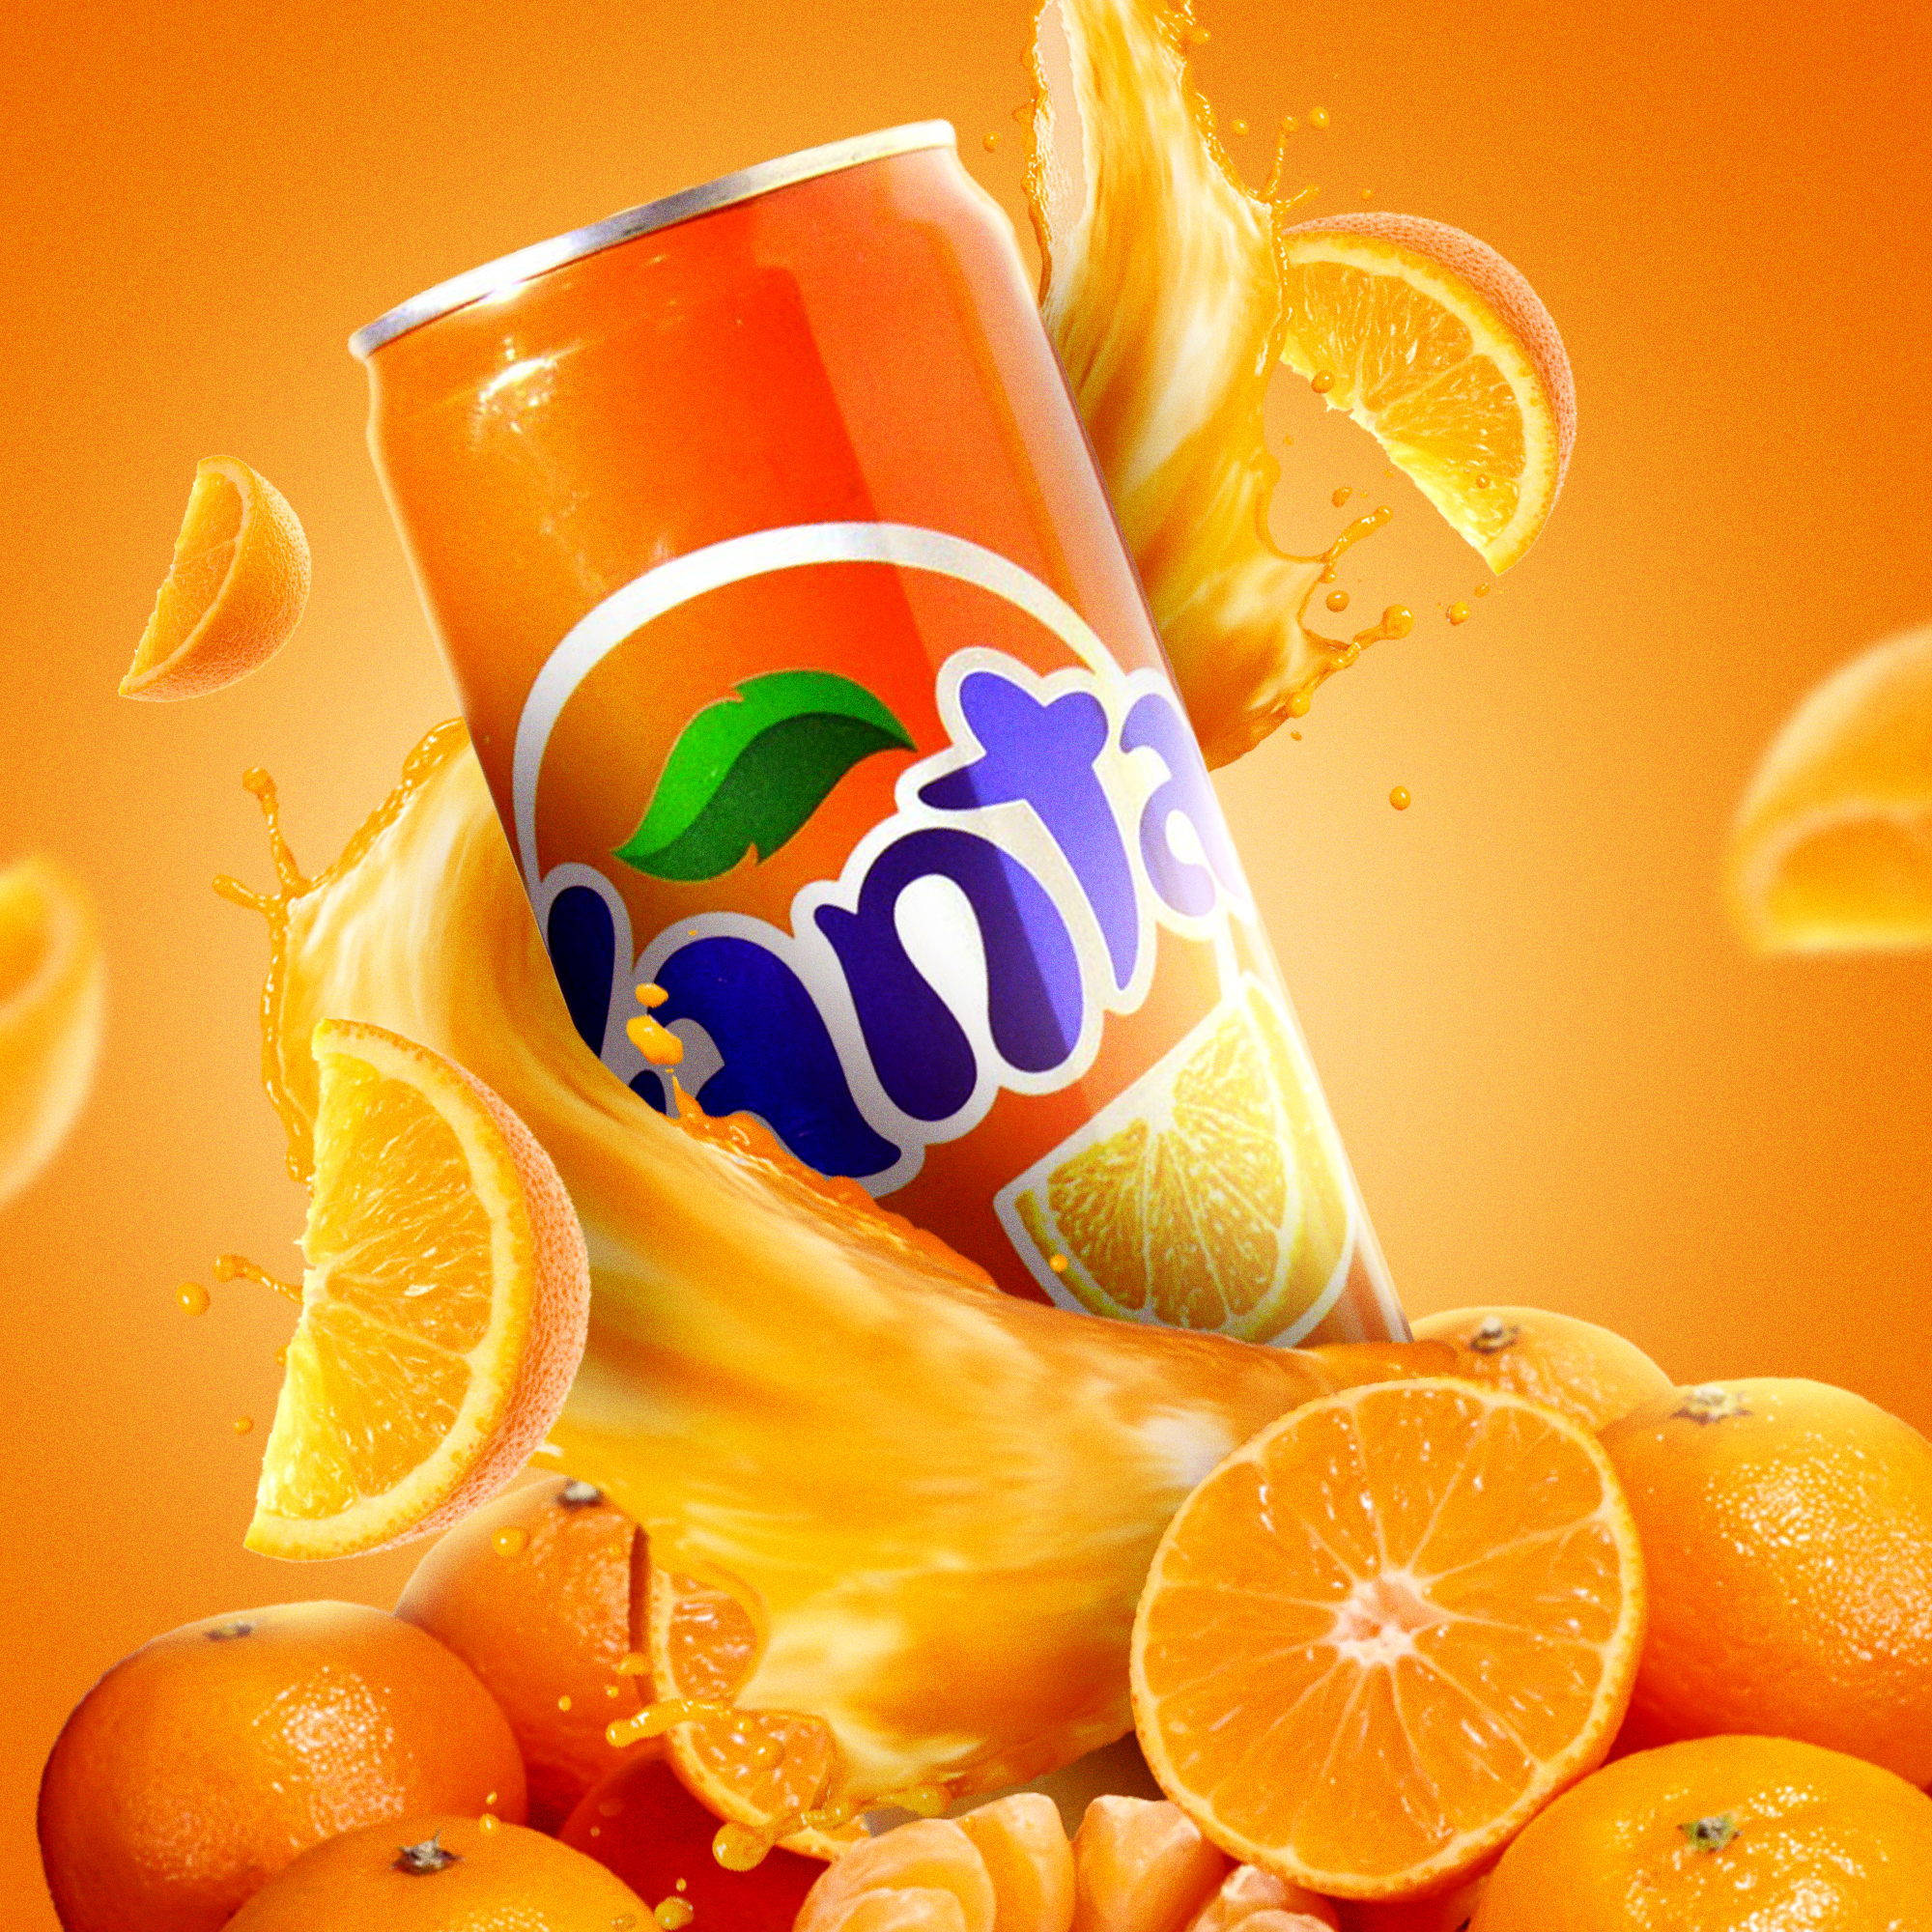 Fanta» 1080P, 2k, 4k HD wallpapers, backgrounds free download | Rare Gallery